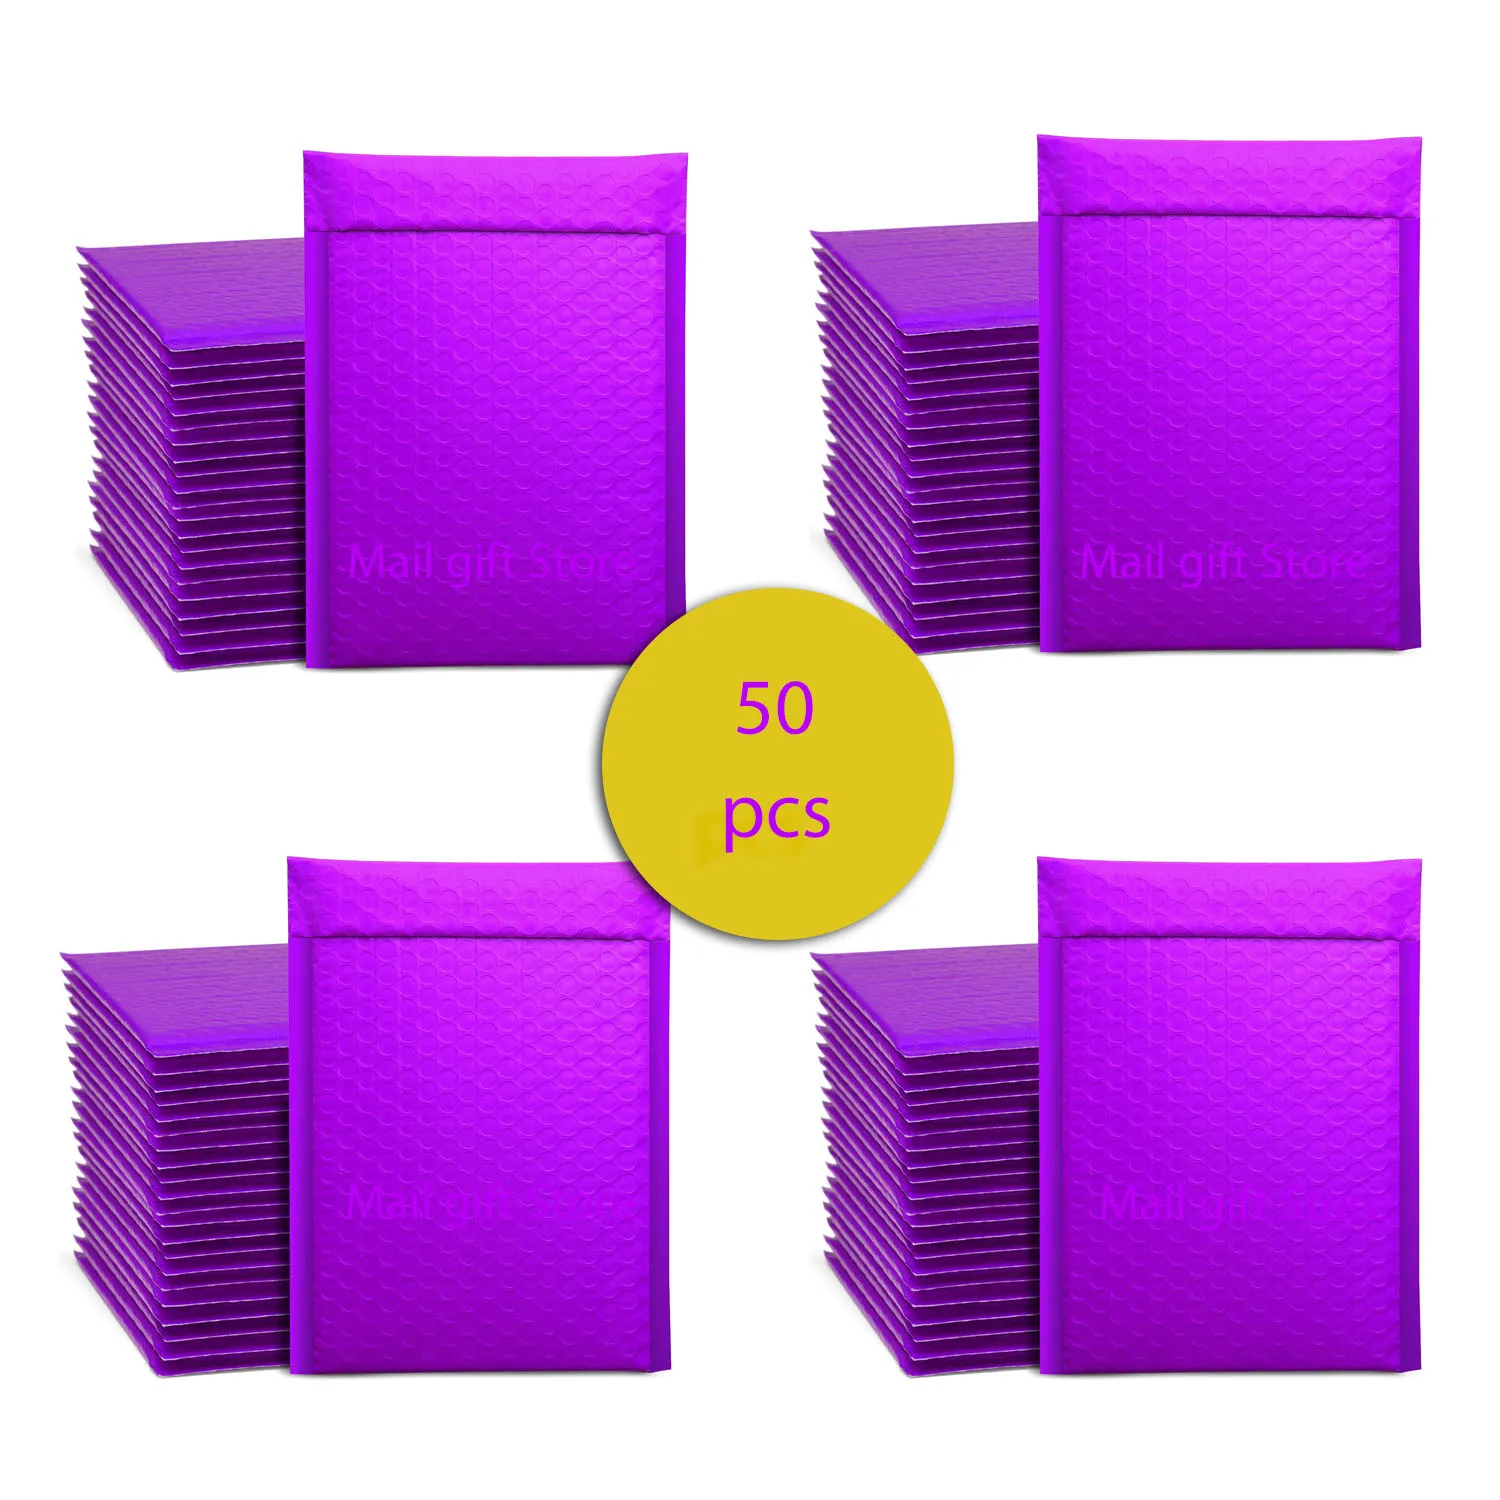 50Pcs Bubble Mailers Bags Packaging For Mailing Gift Poly Envelopes Bubble Mailers Padded Envelopes Purple White Black And Pink